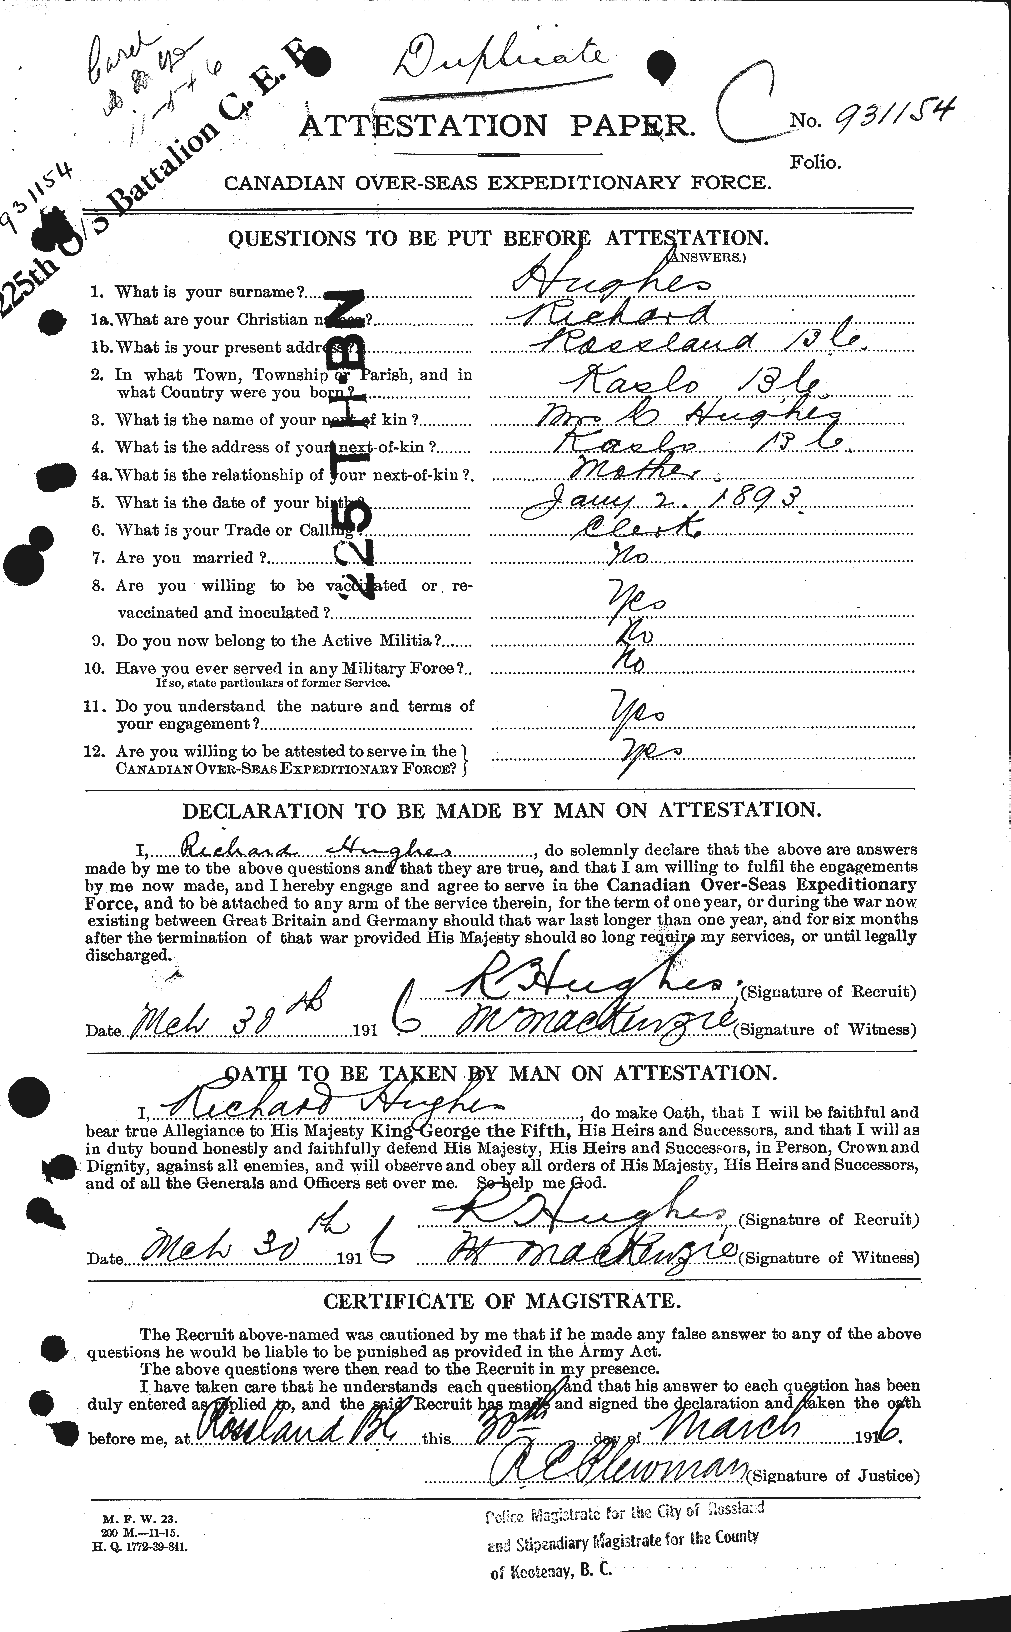 Personnel Records of the First World War - CEF 404186a